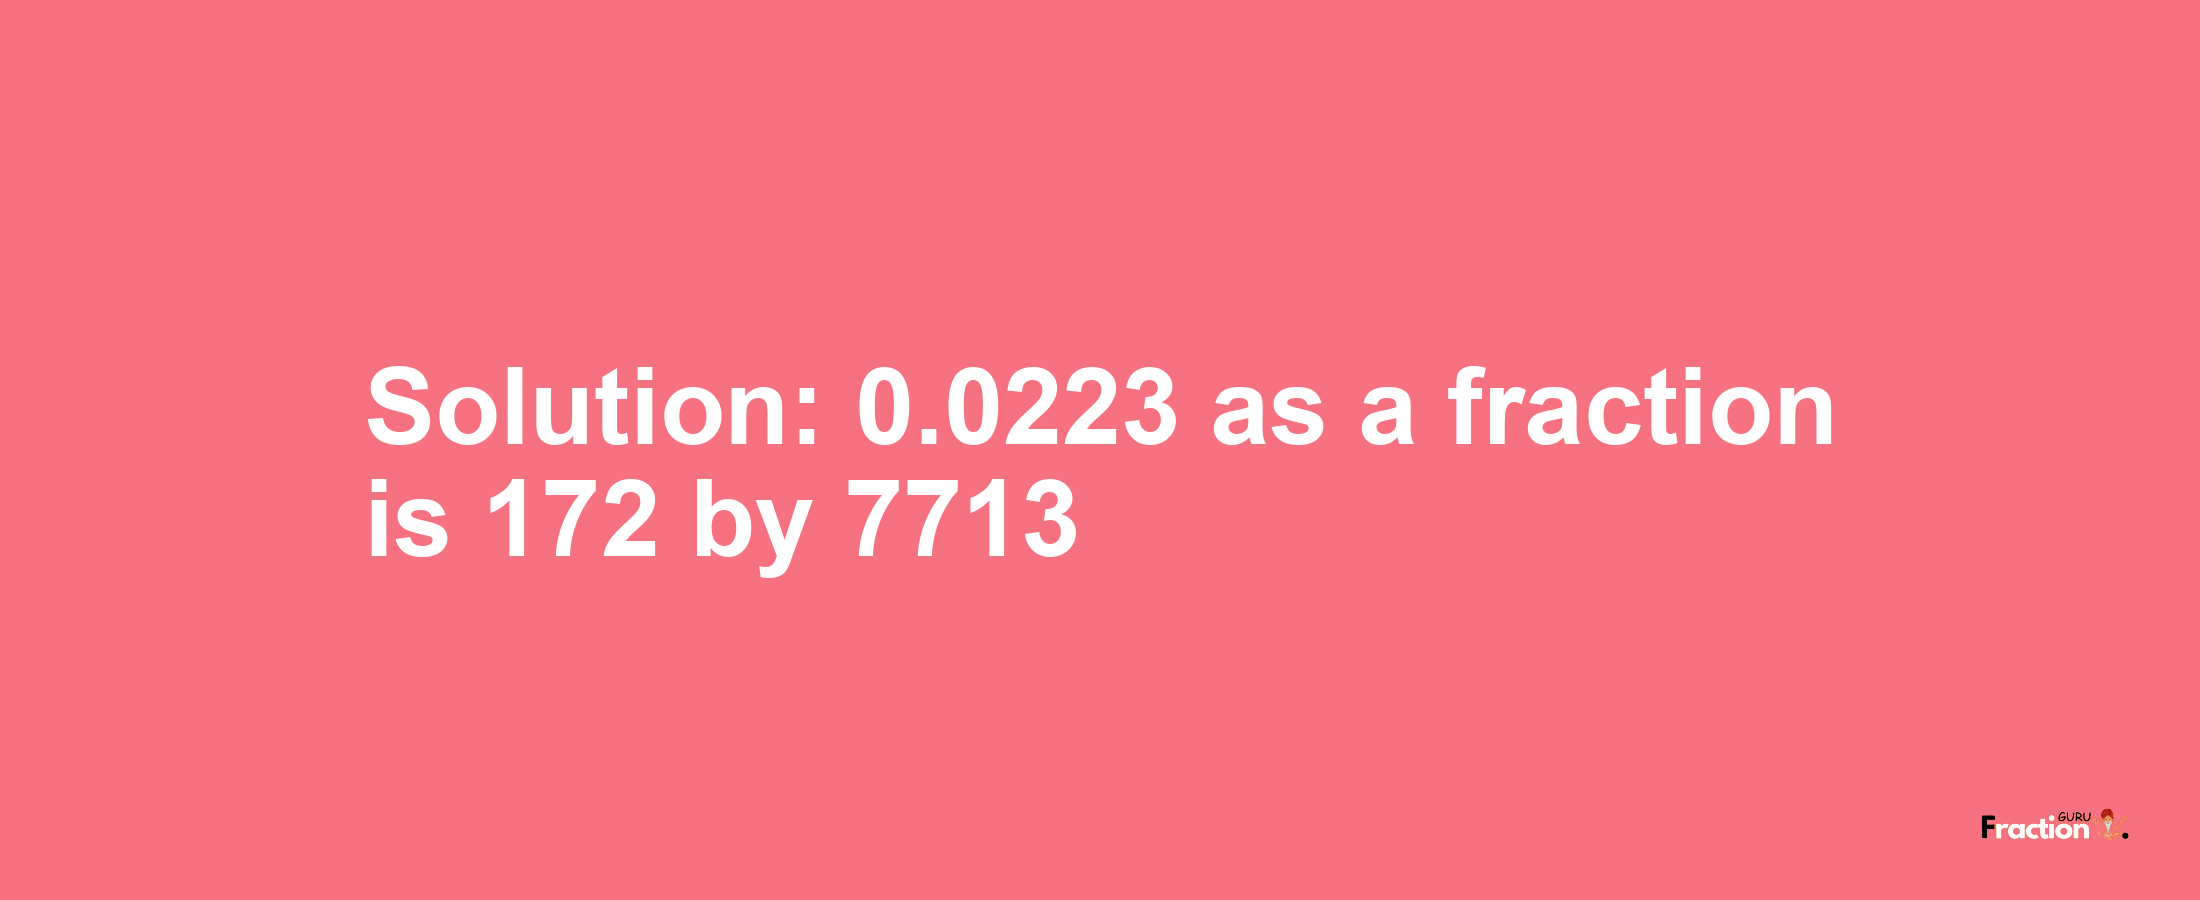 Solution:0.0223 as a fraction is 172/7713